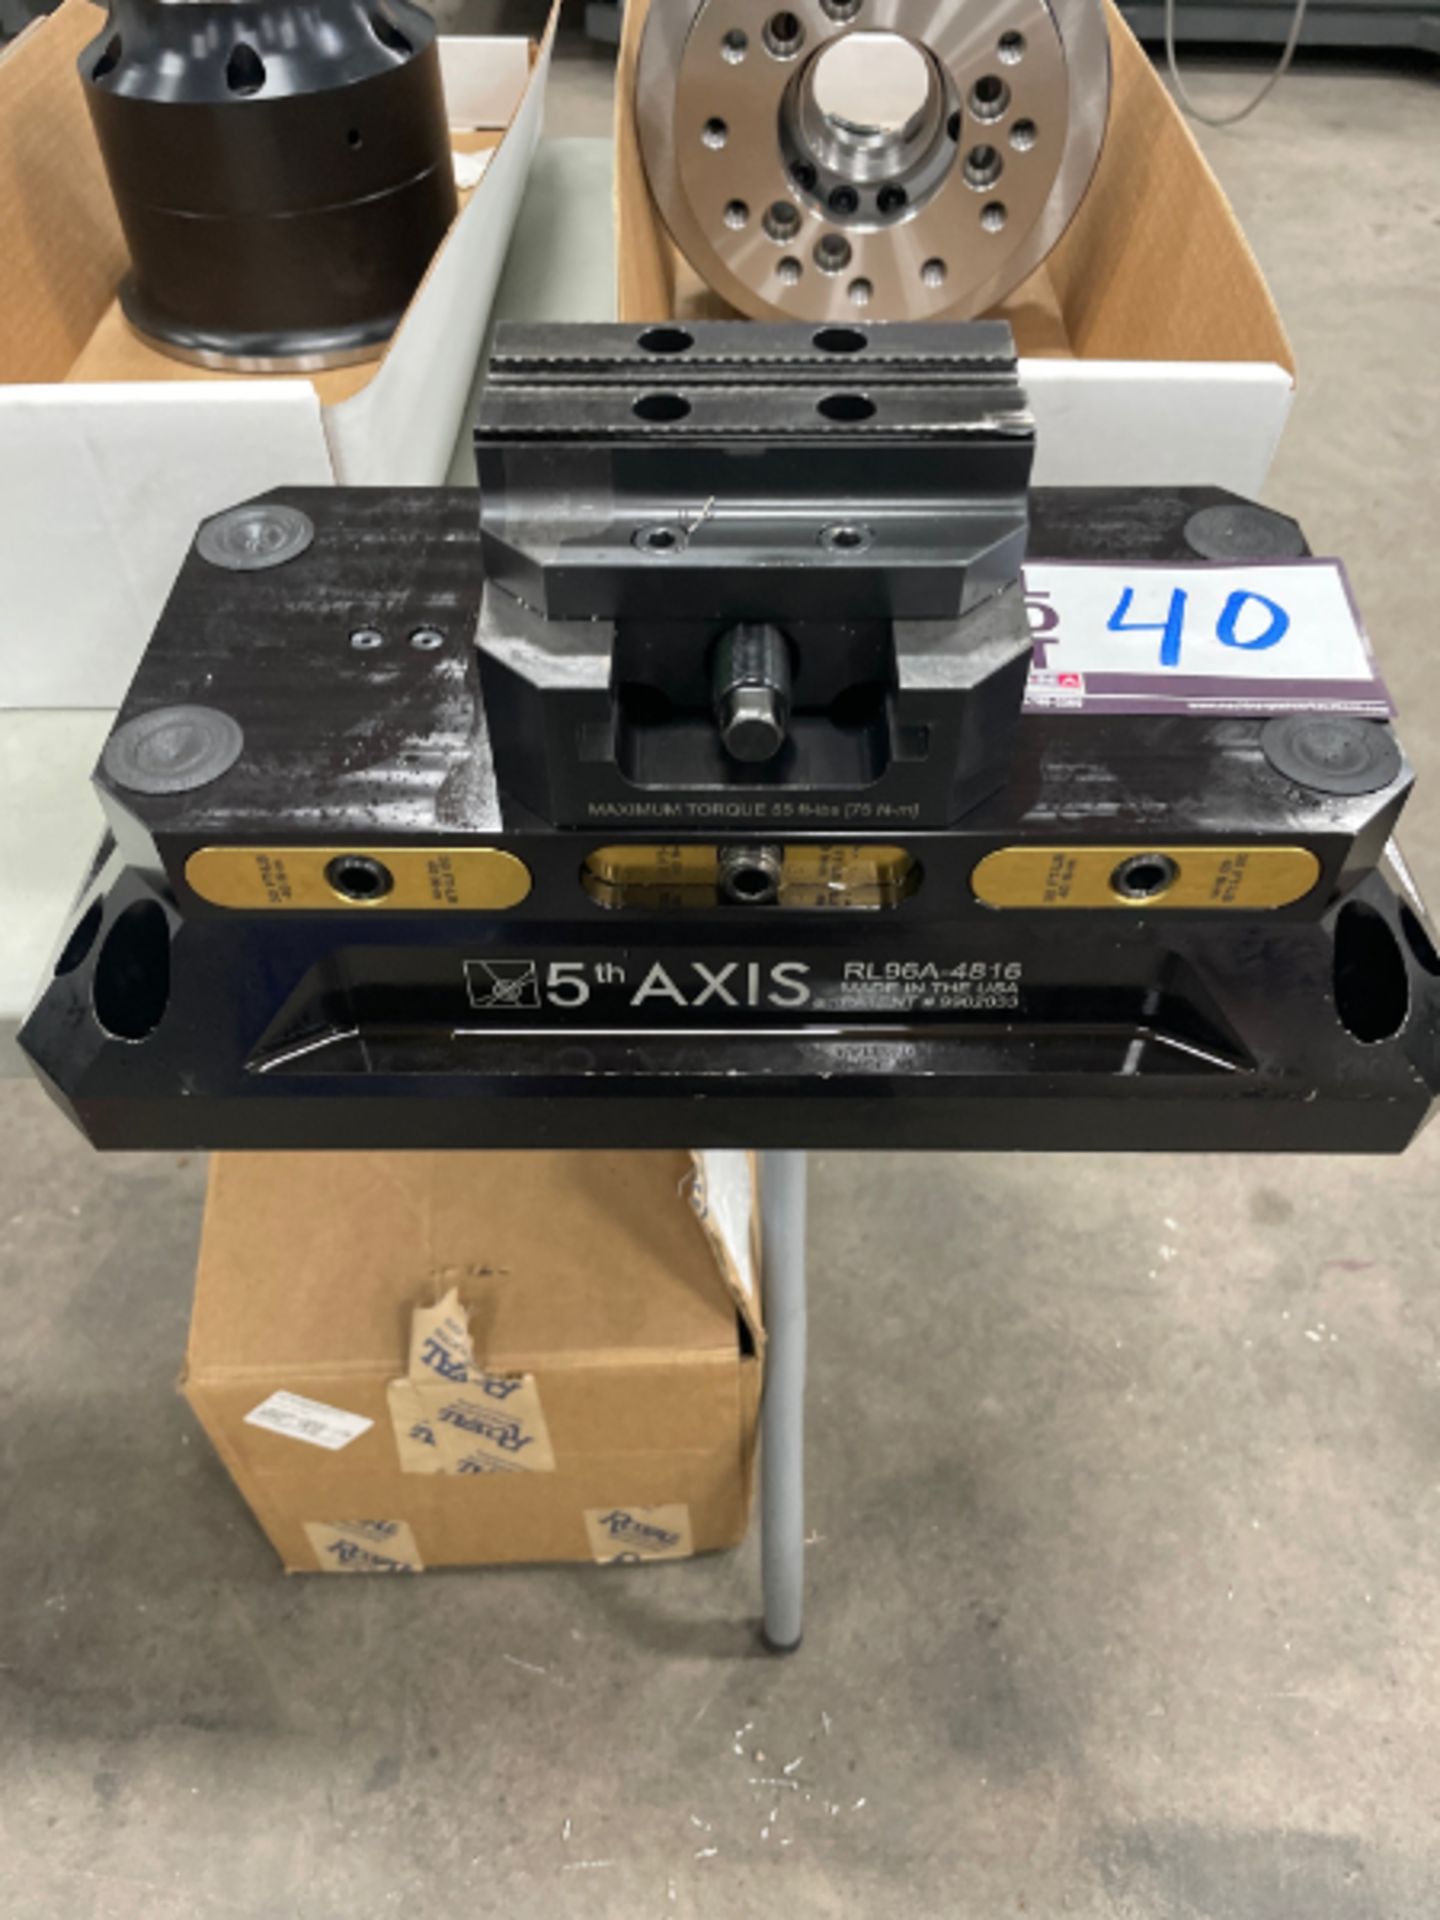 5-Axis RL96A-4816 Vise and Faceplate